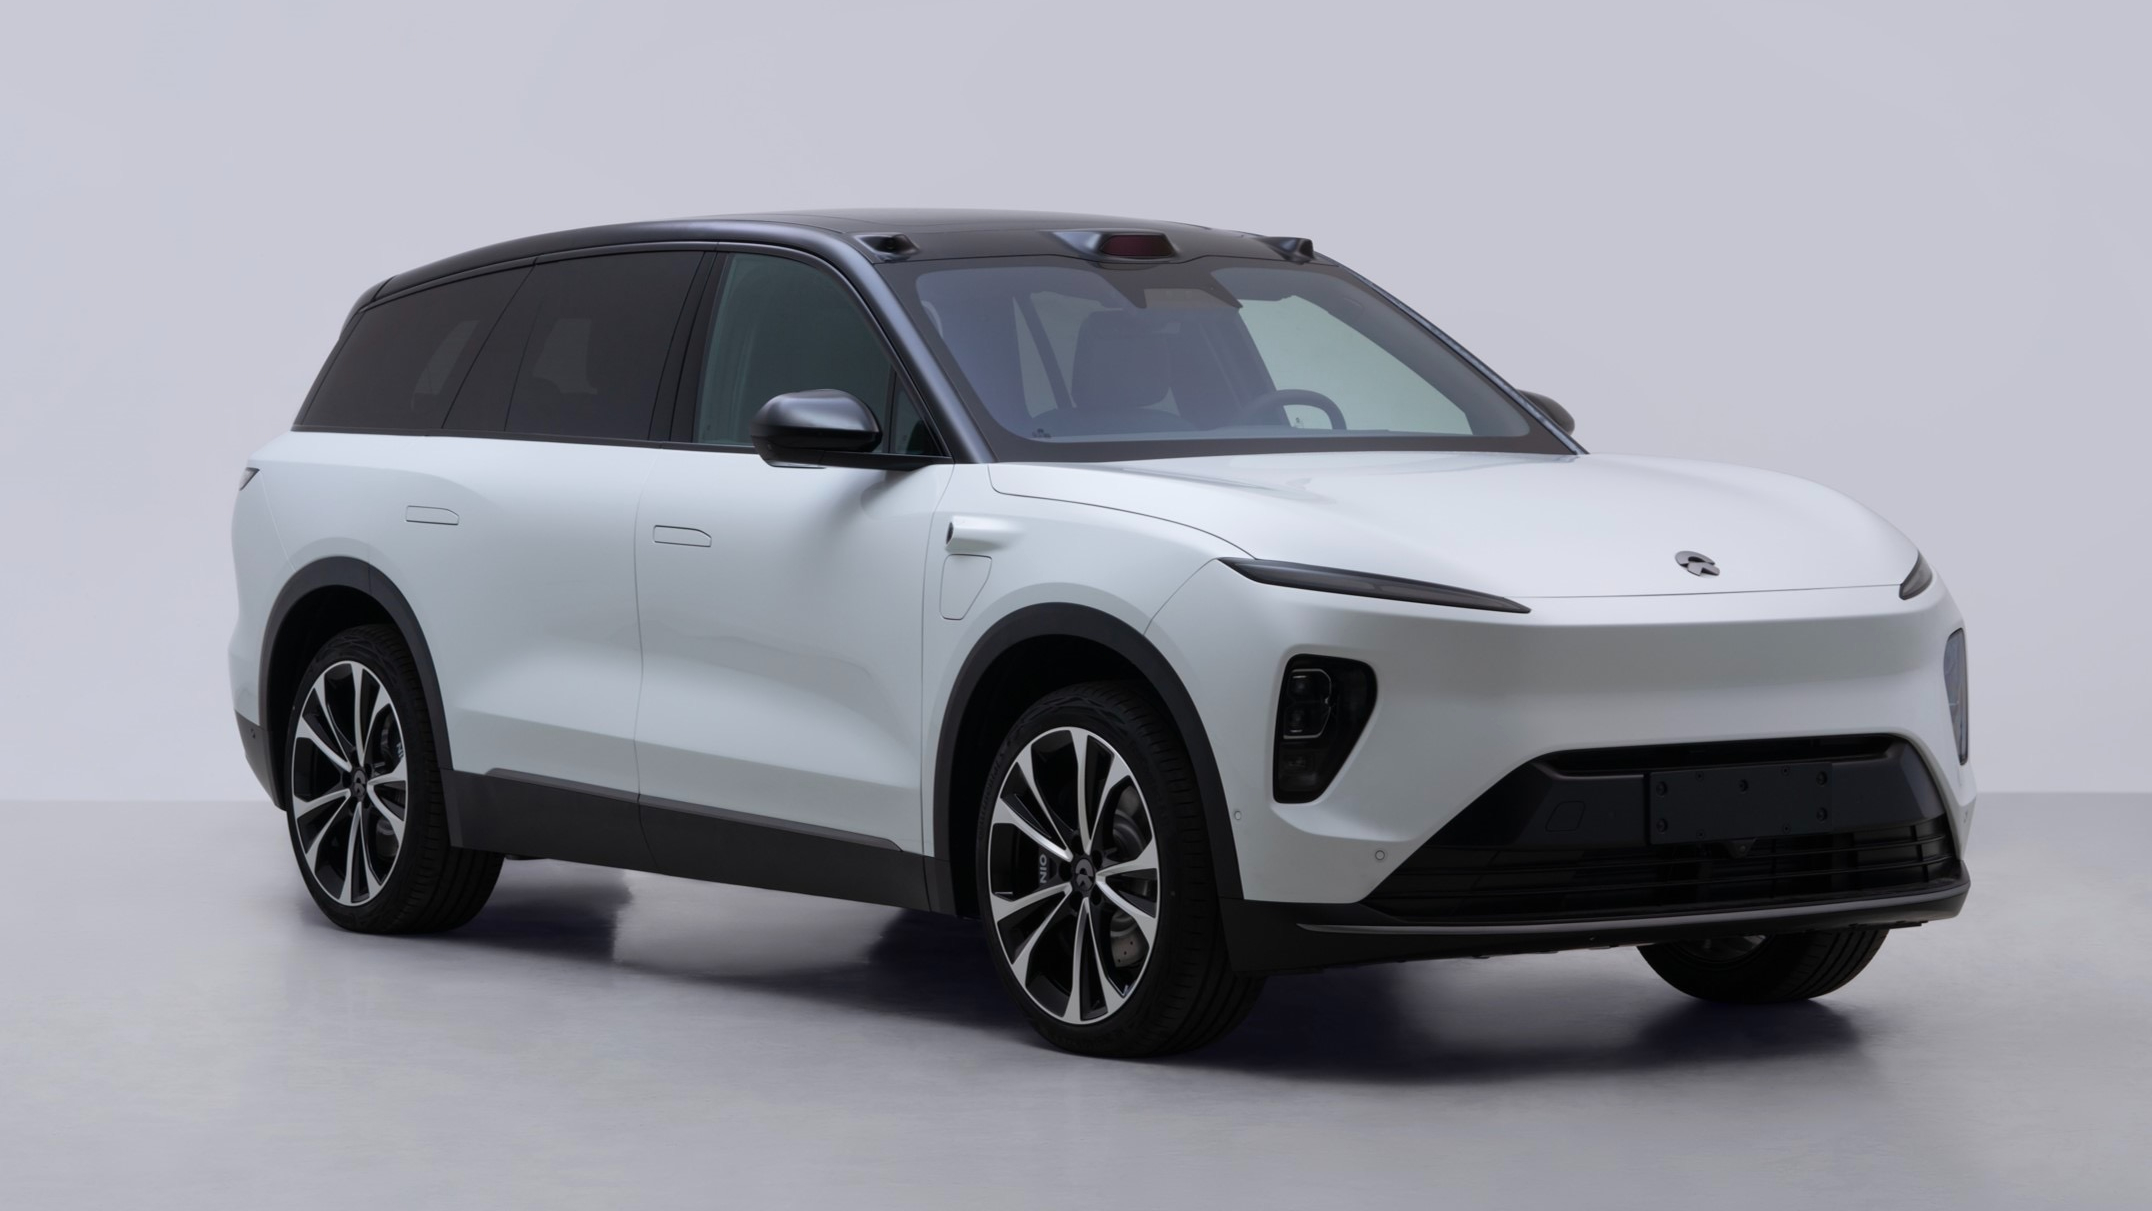 The new NIO ES8 has been officially unveiled, with an enlarged body and the adoption of the cutting-edge Zhong Chuang AFAIRE power battery.